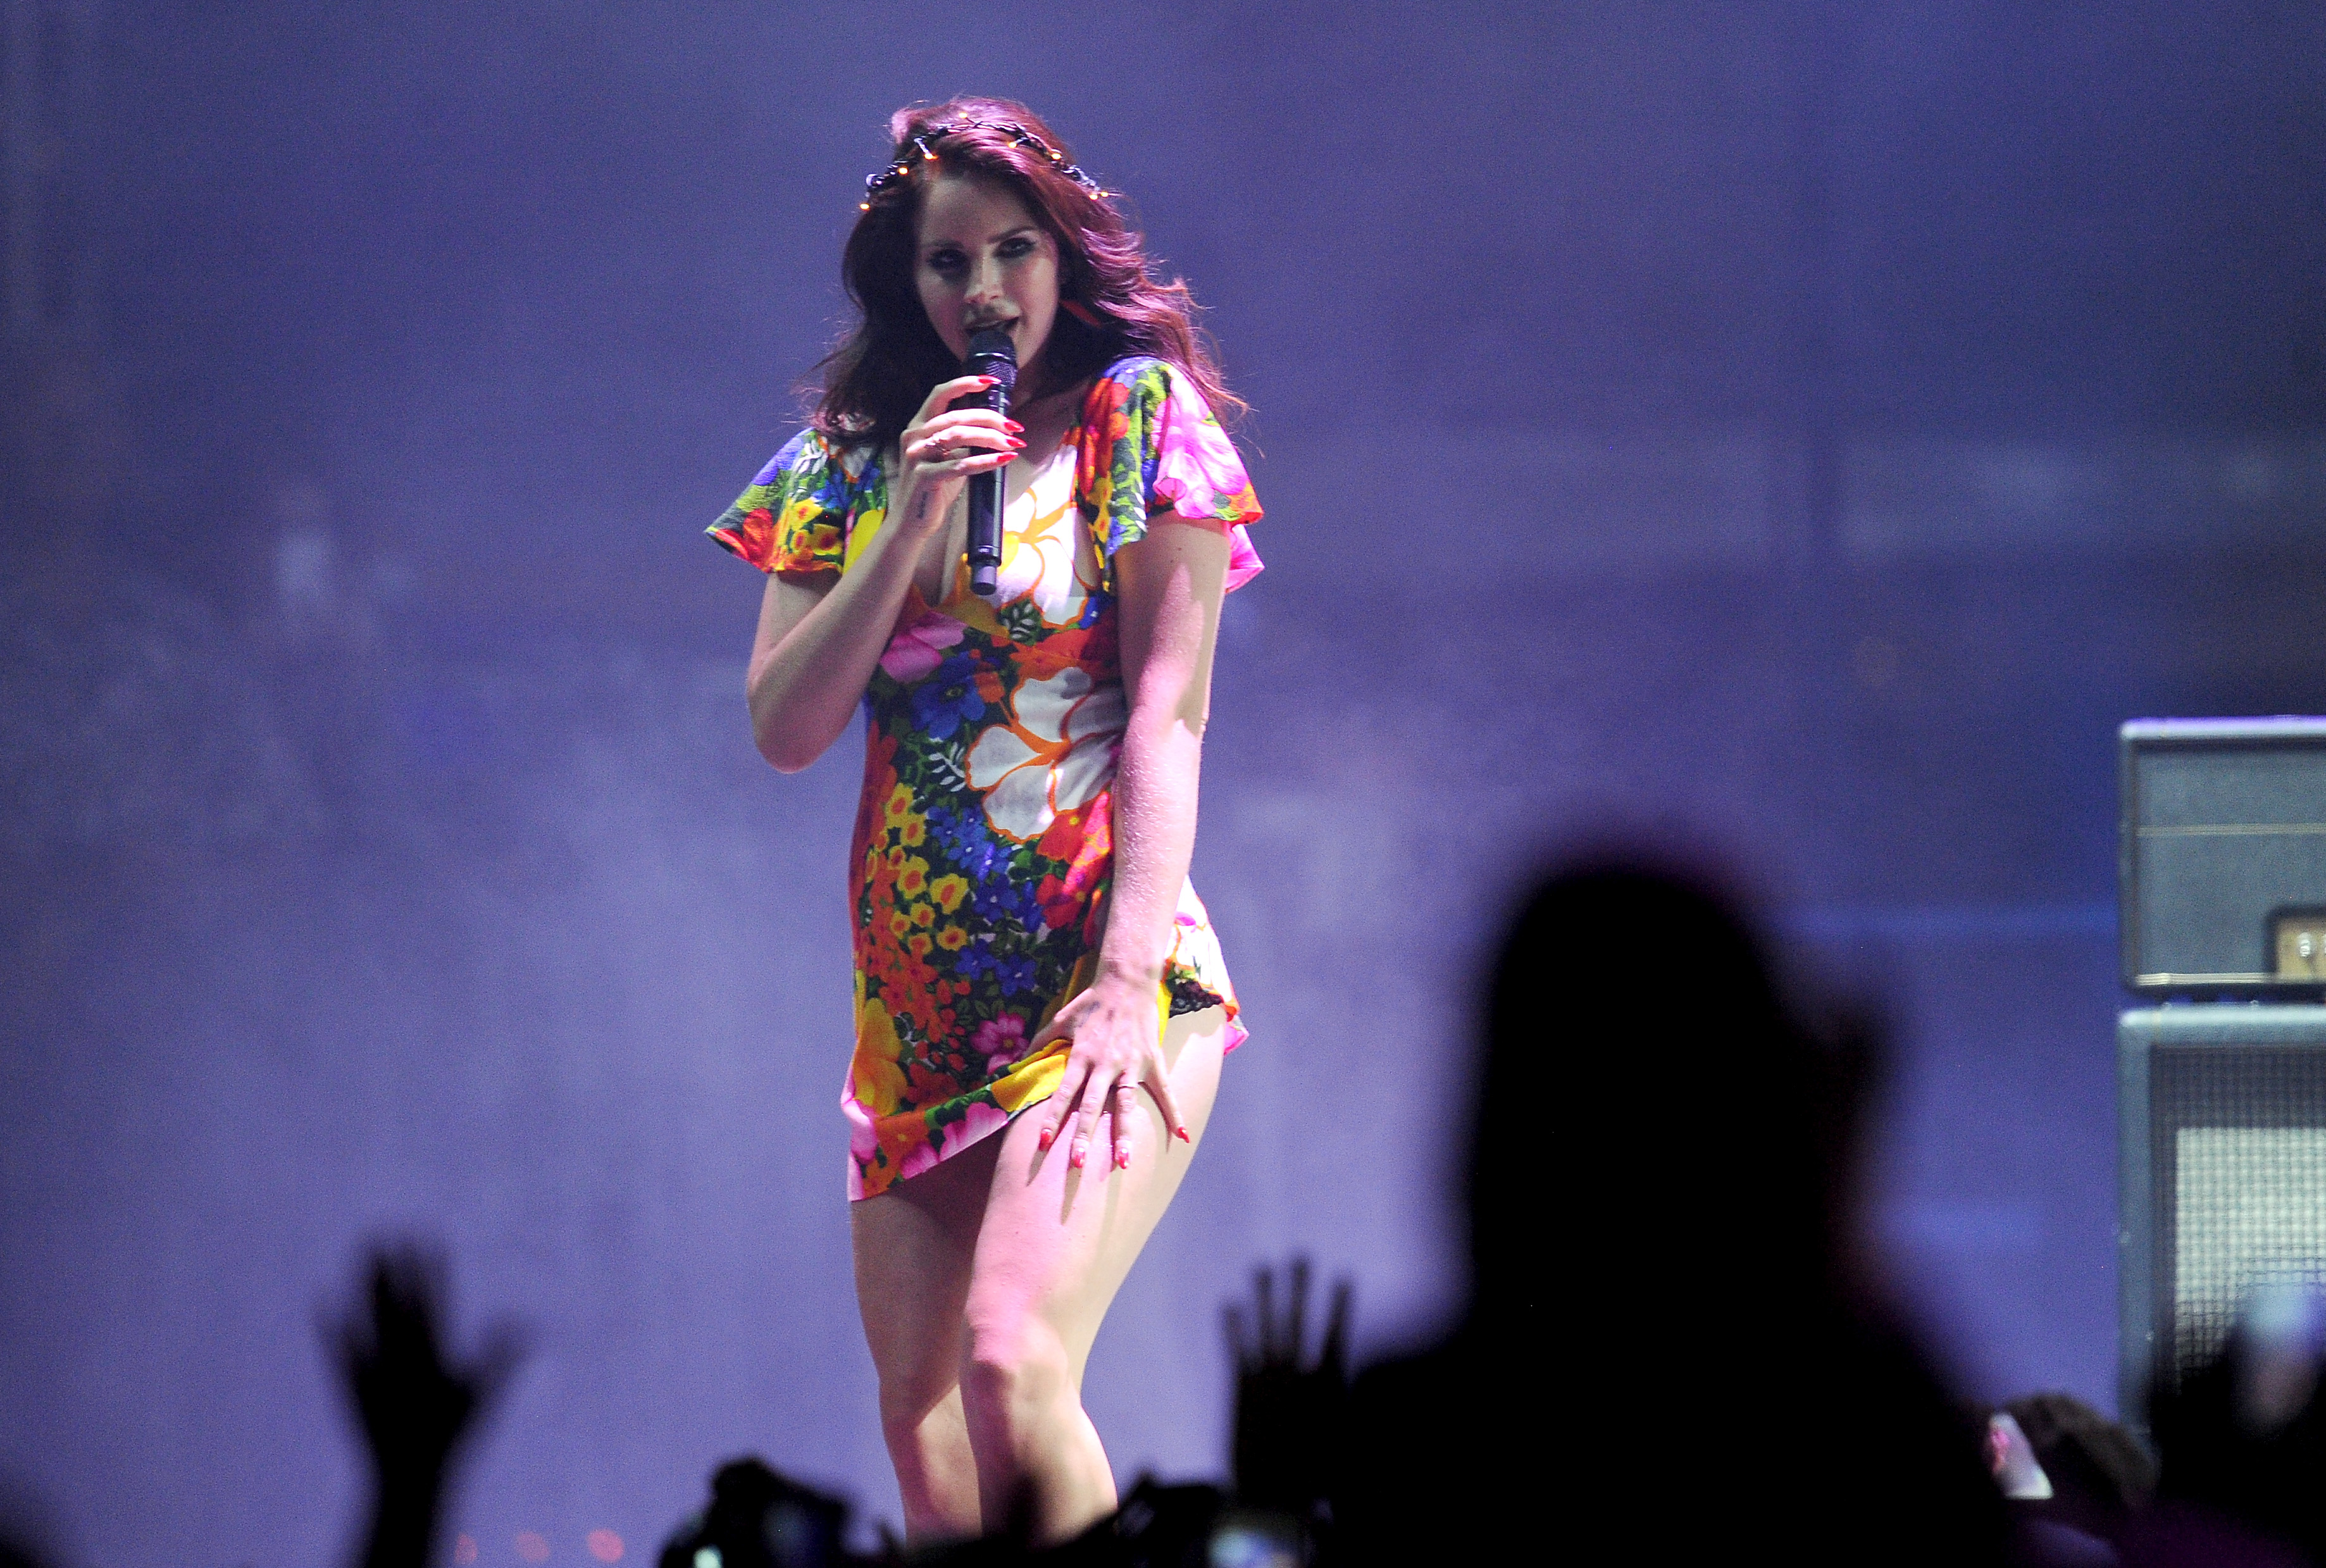 Lana Del Rey at 2014 Coachella Valley Music and Arts Festival - Weekend 2 - Day 3